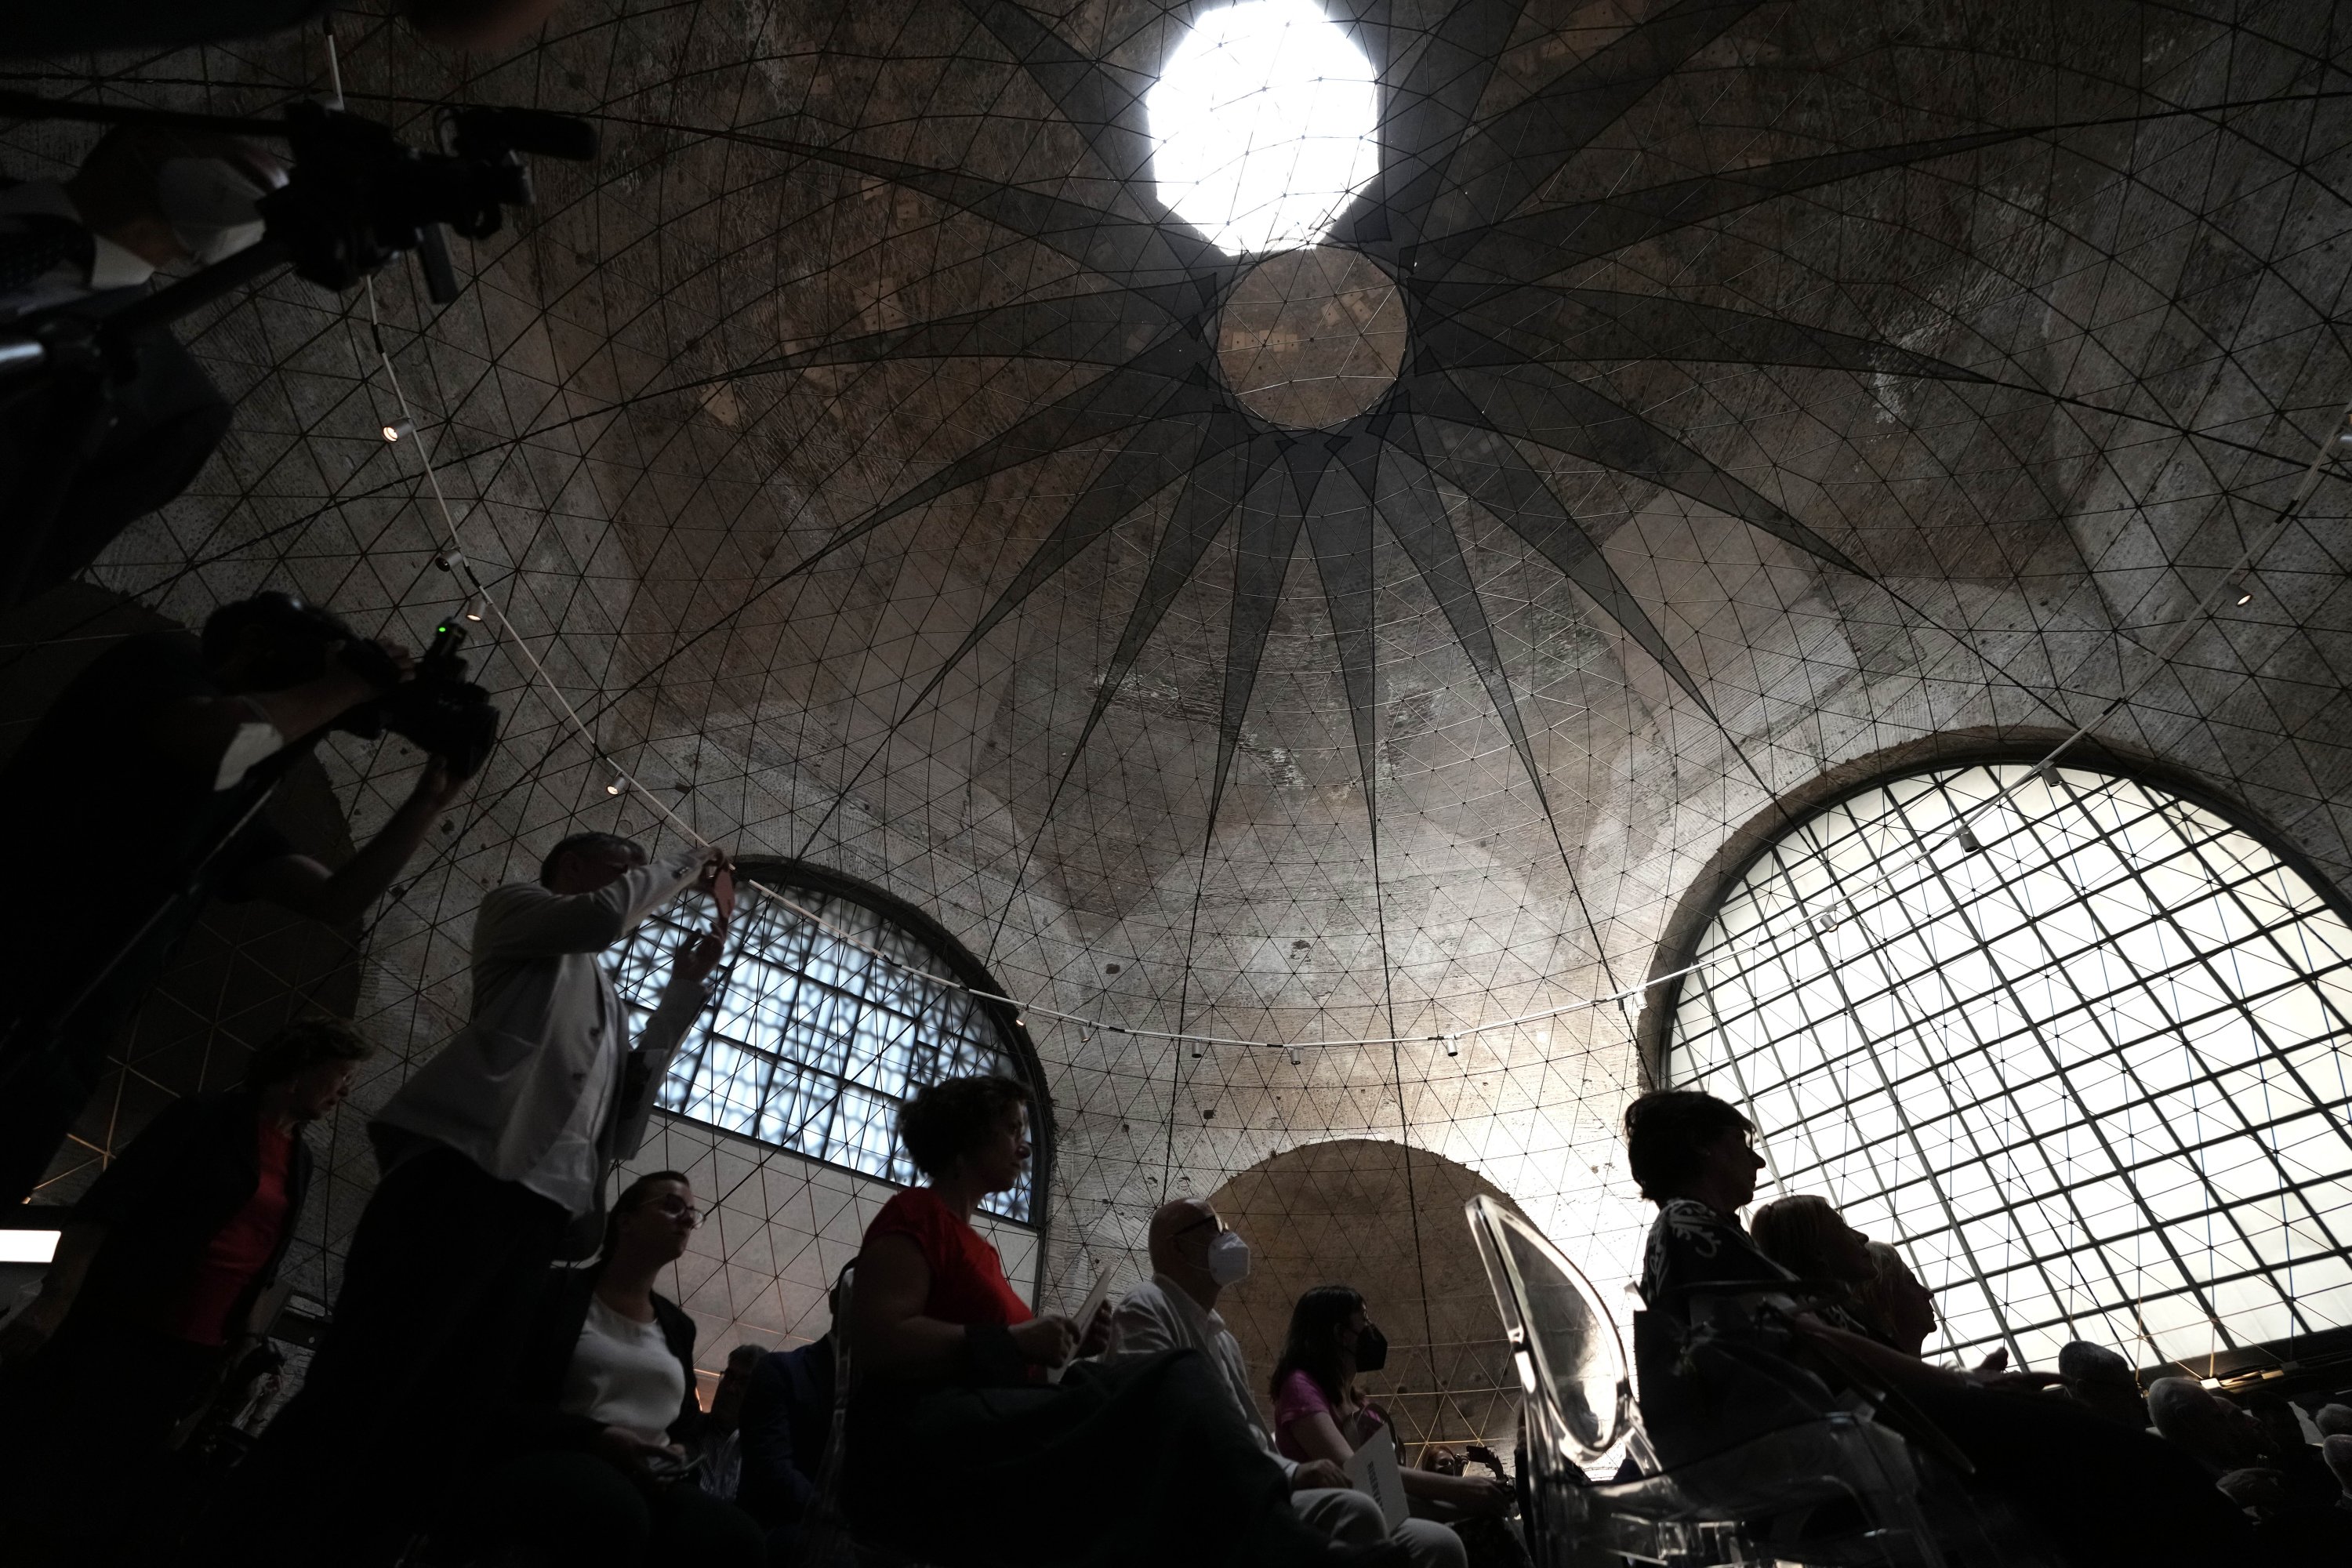 A view of the Octagonal Hall of the ancient Baths of Diocletian during the unveiling of the new 